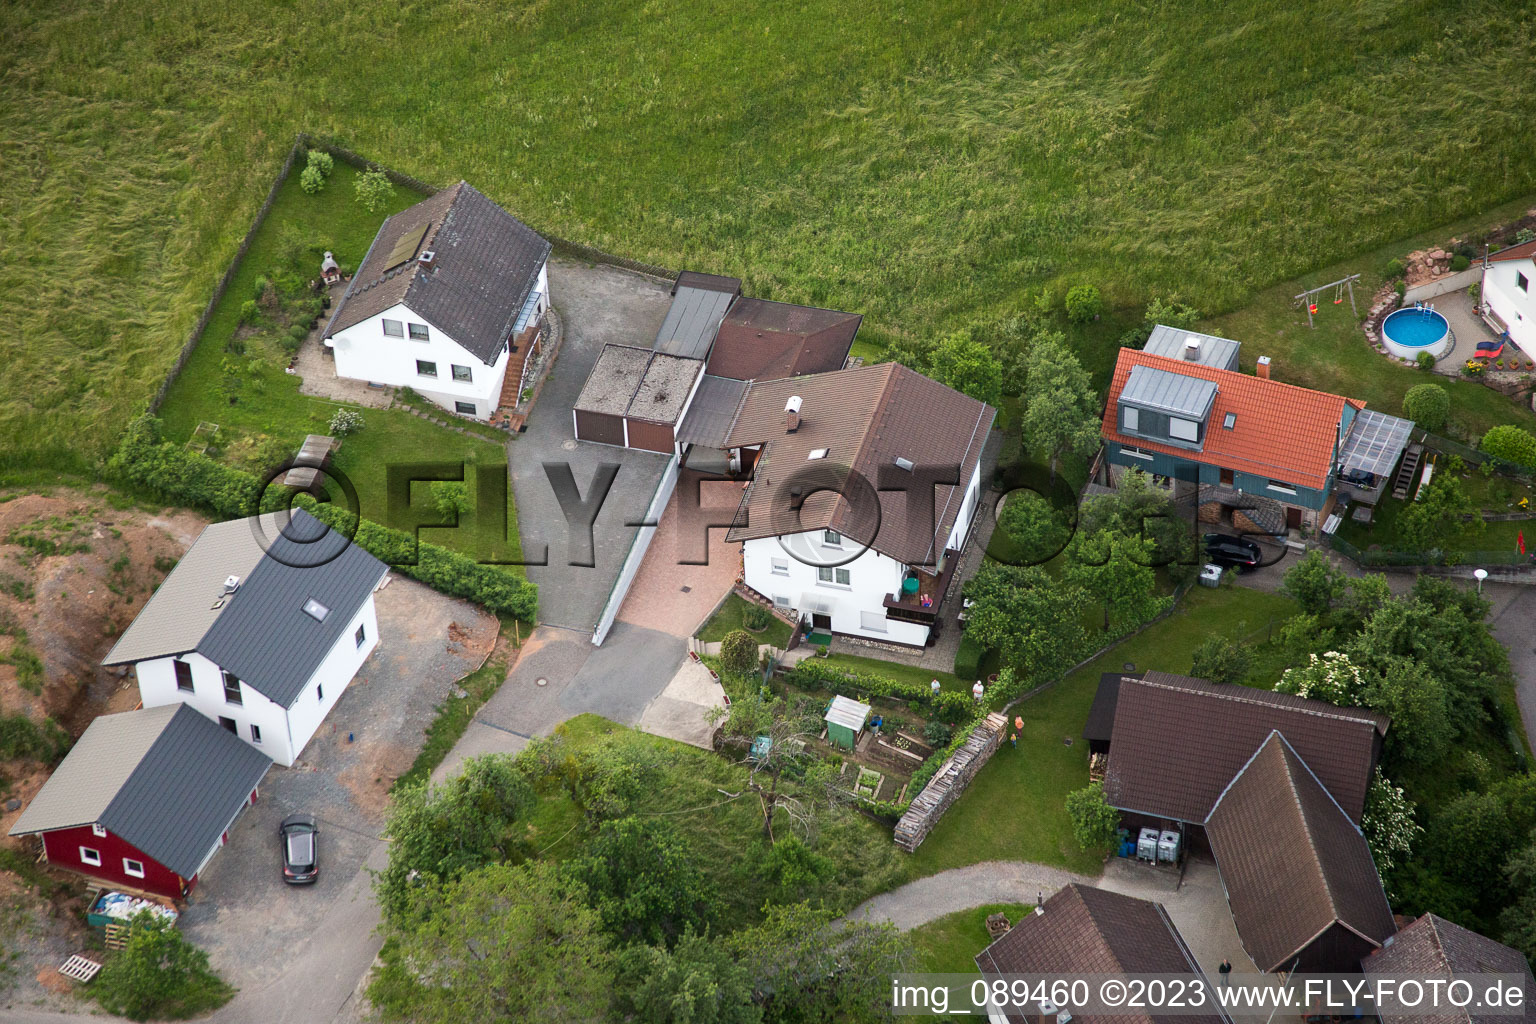 Drone image of Brombach in the state Baden-Wuerttemberg, Germany